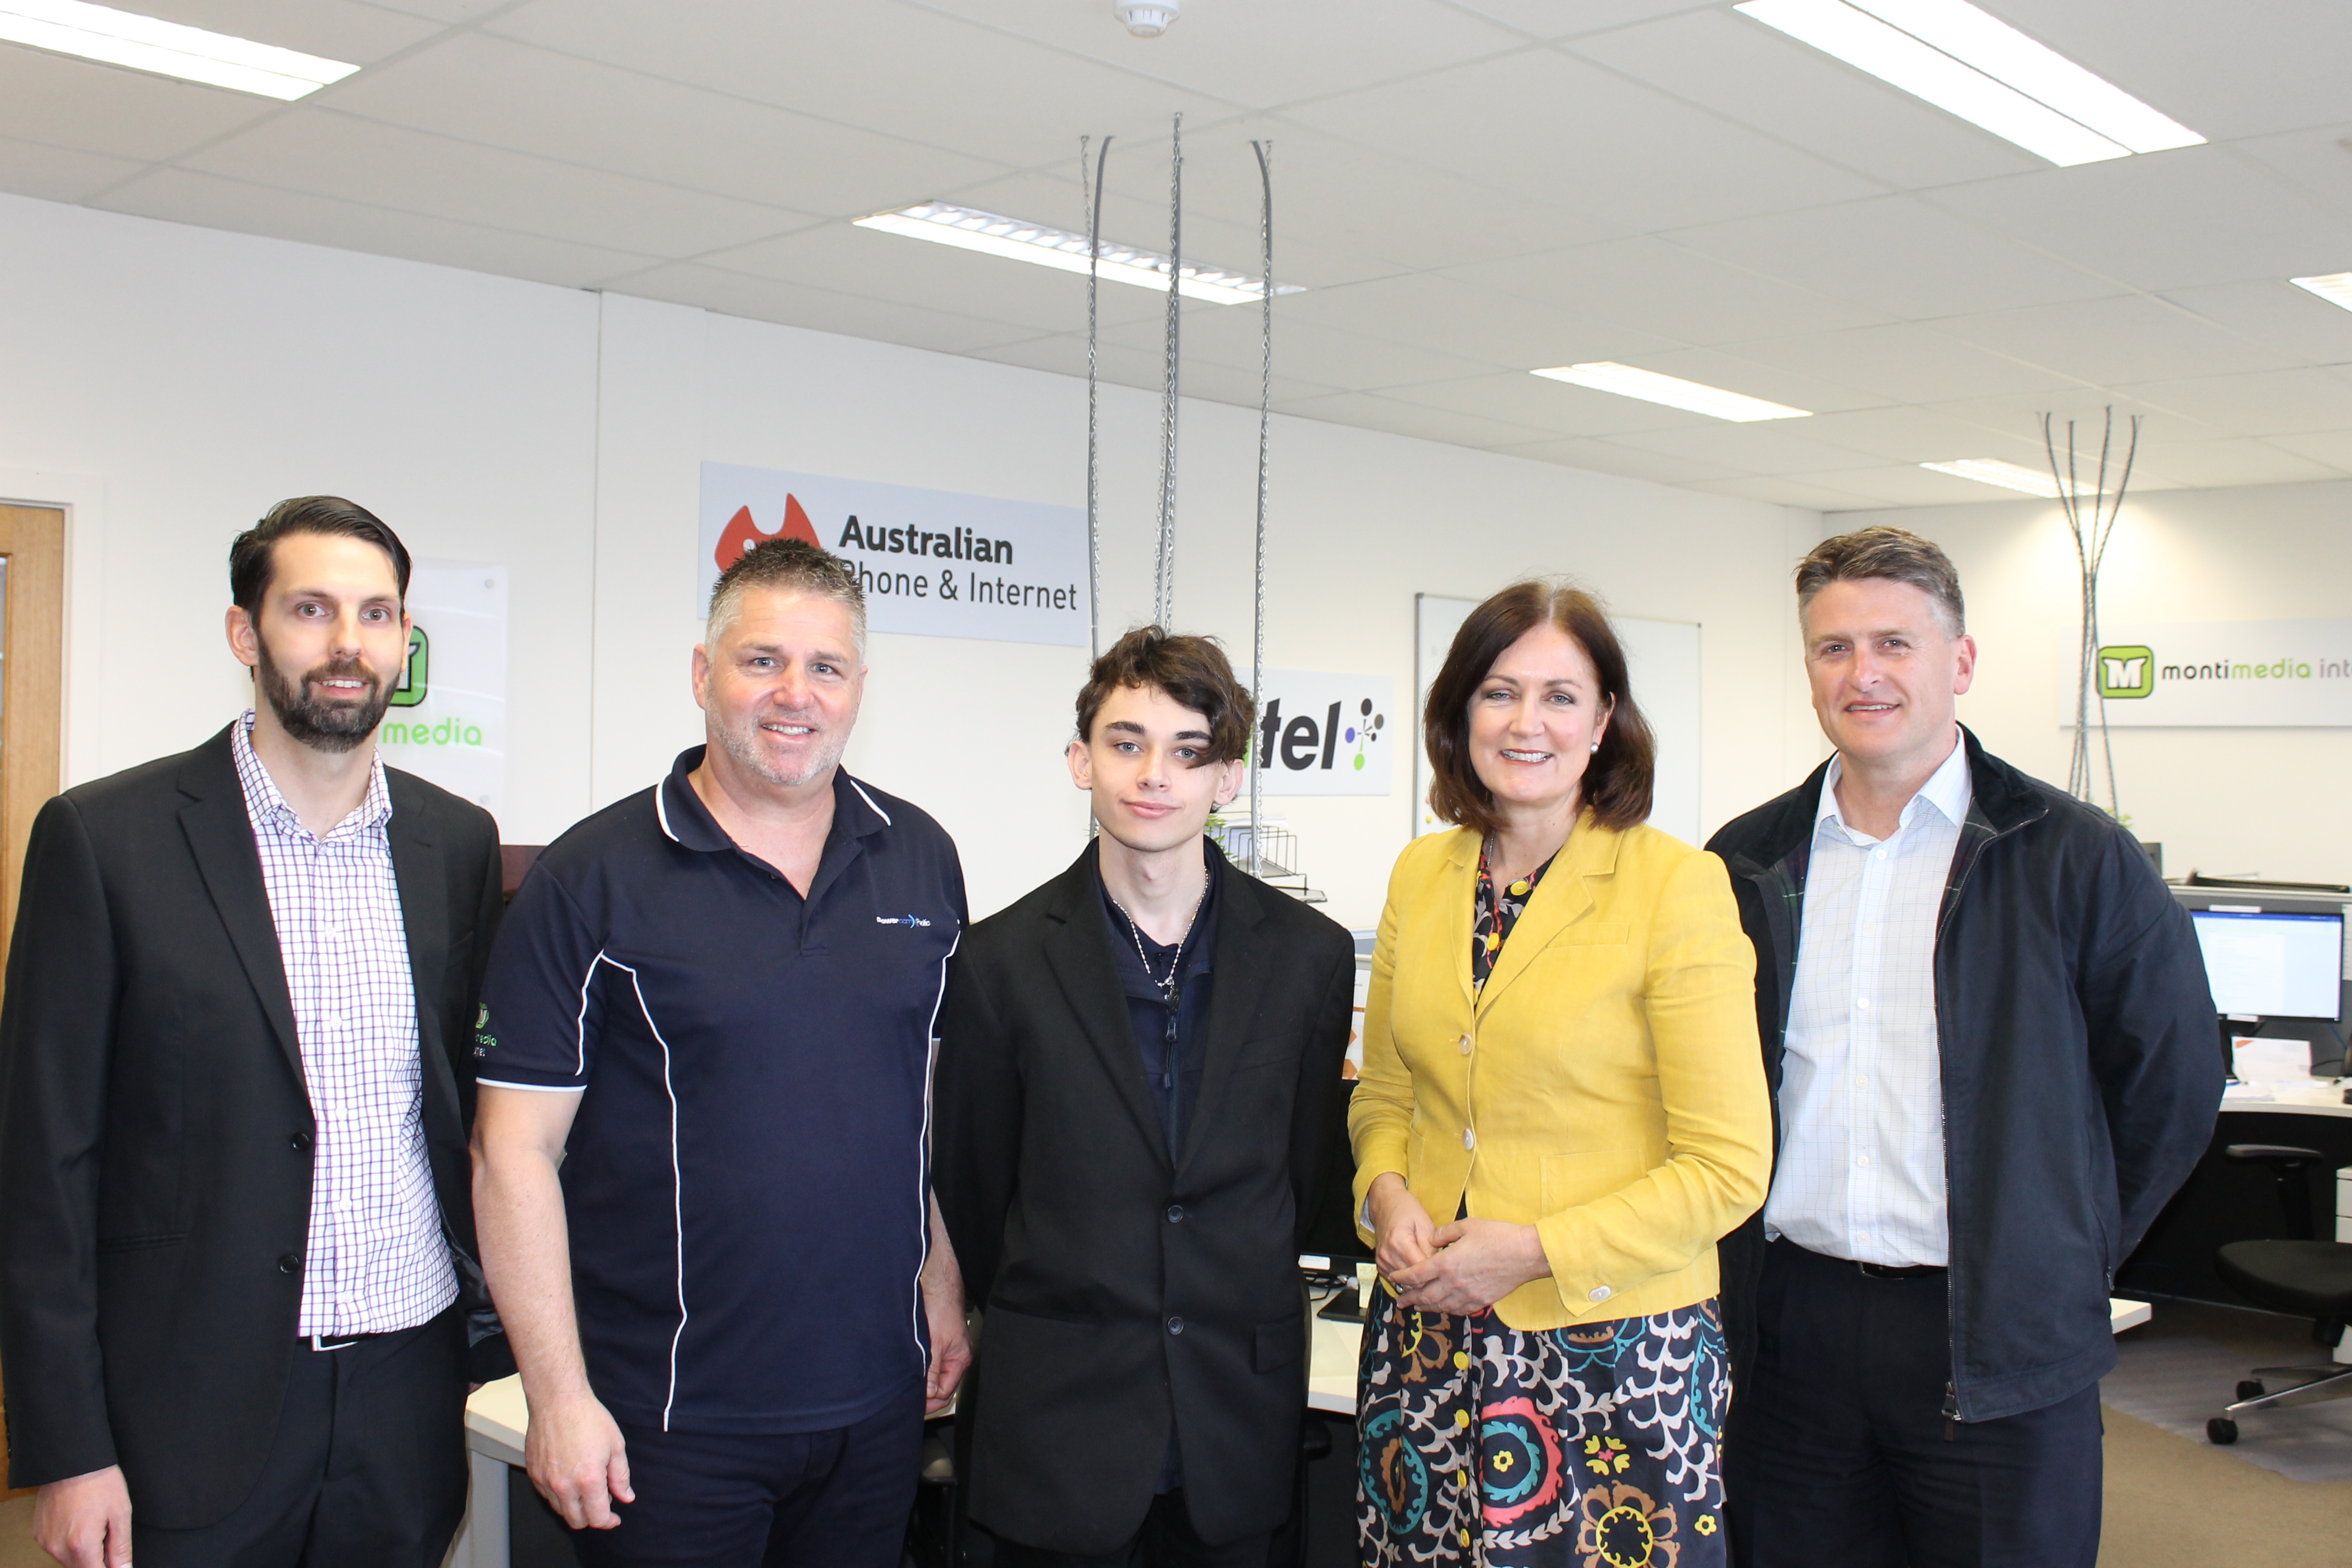 MatchWorks Employment Consultant Chris Fowler, Powercom Pacific Managing Director Barry Ford, MatchWorks job seeker Jesse, Sarah Henderson MP and MatchWorks jobactive Director Mark McCoy.